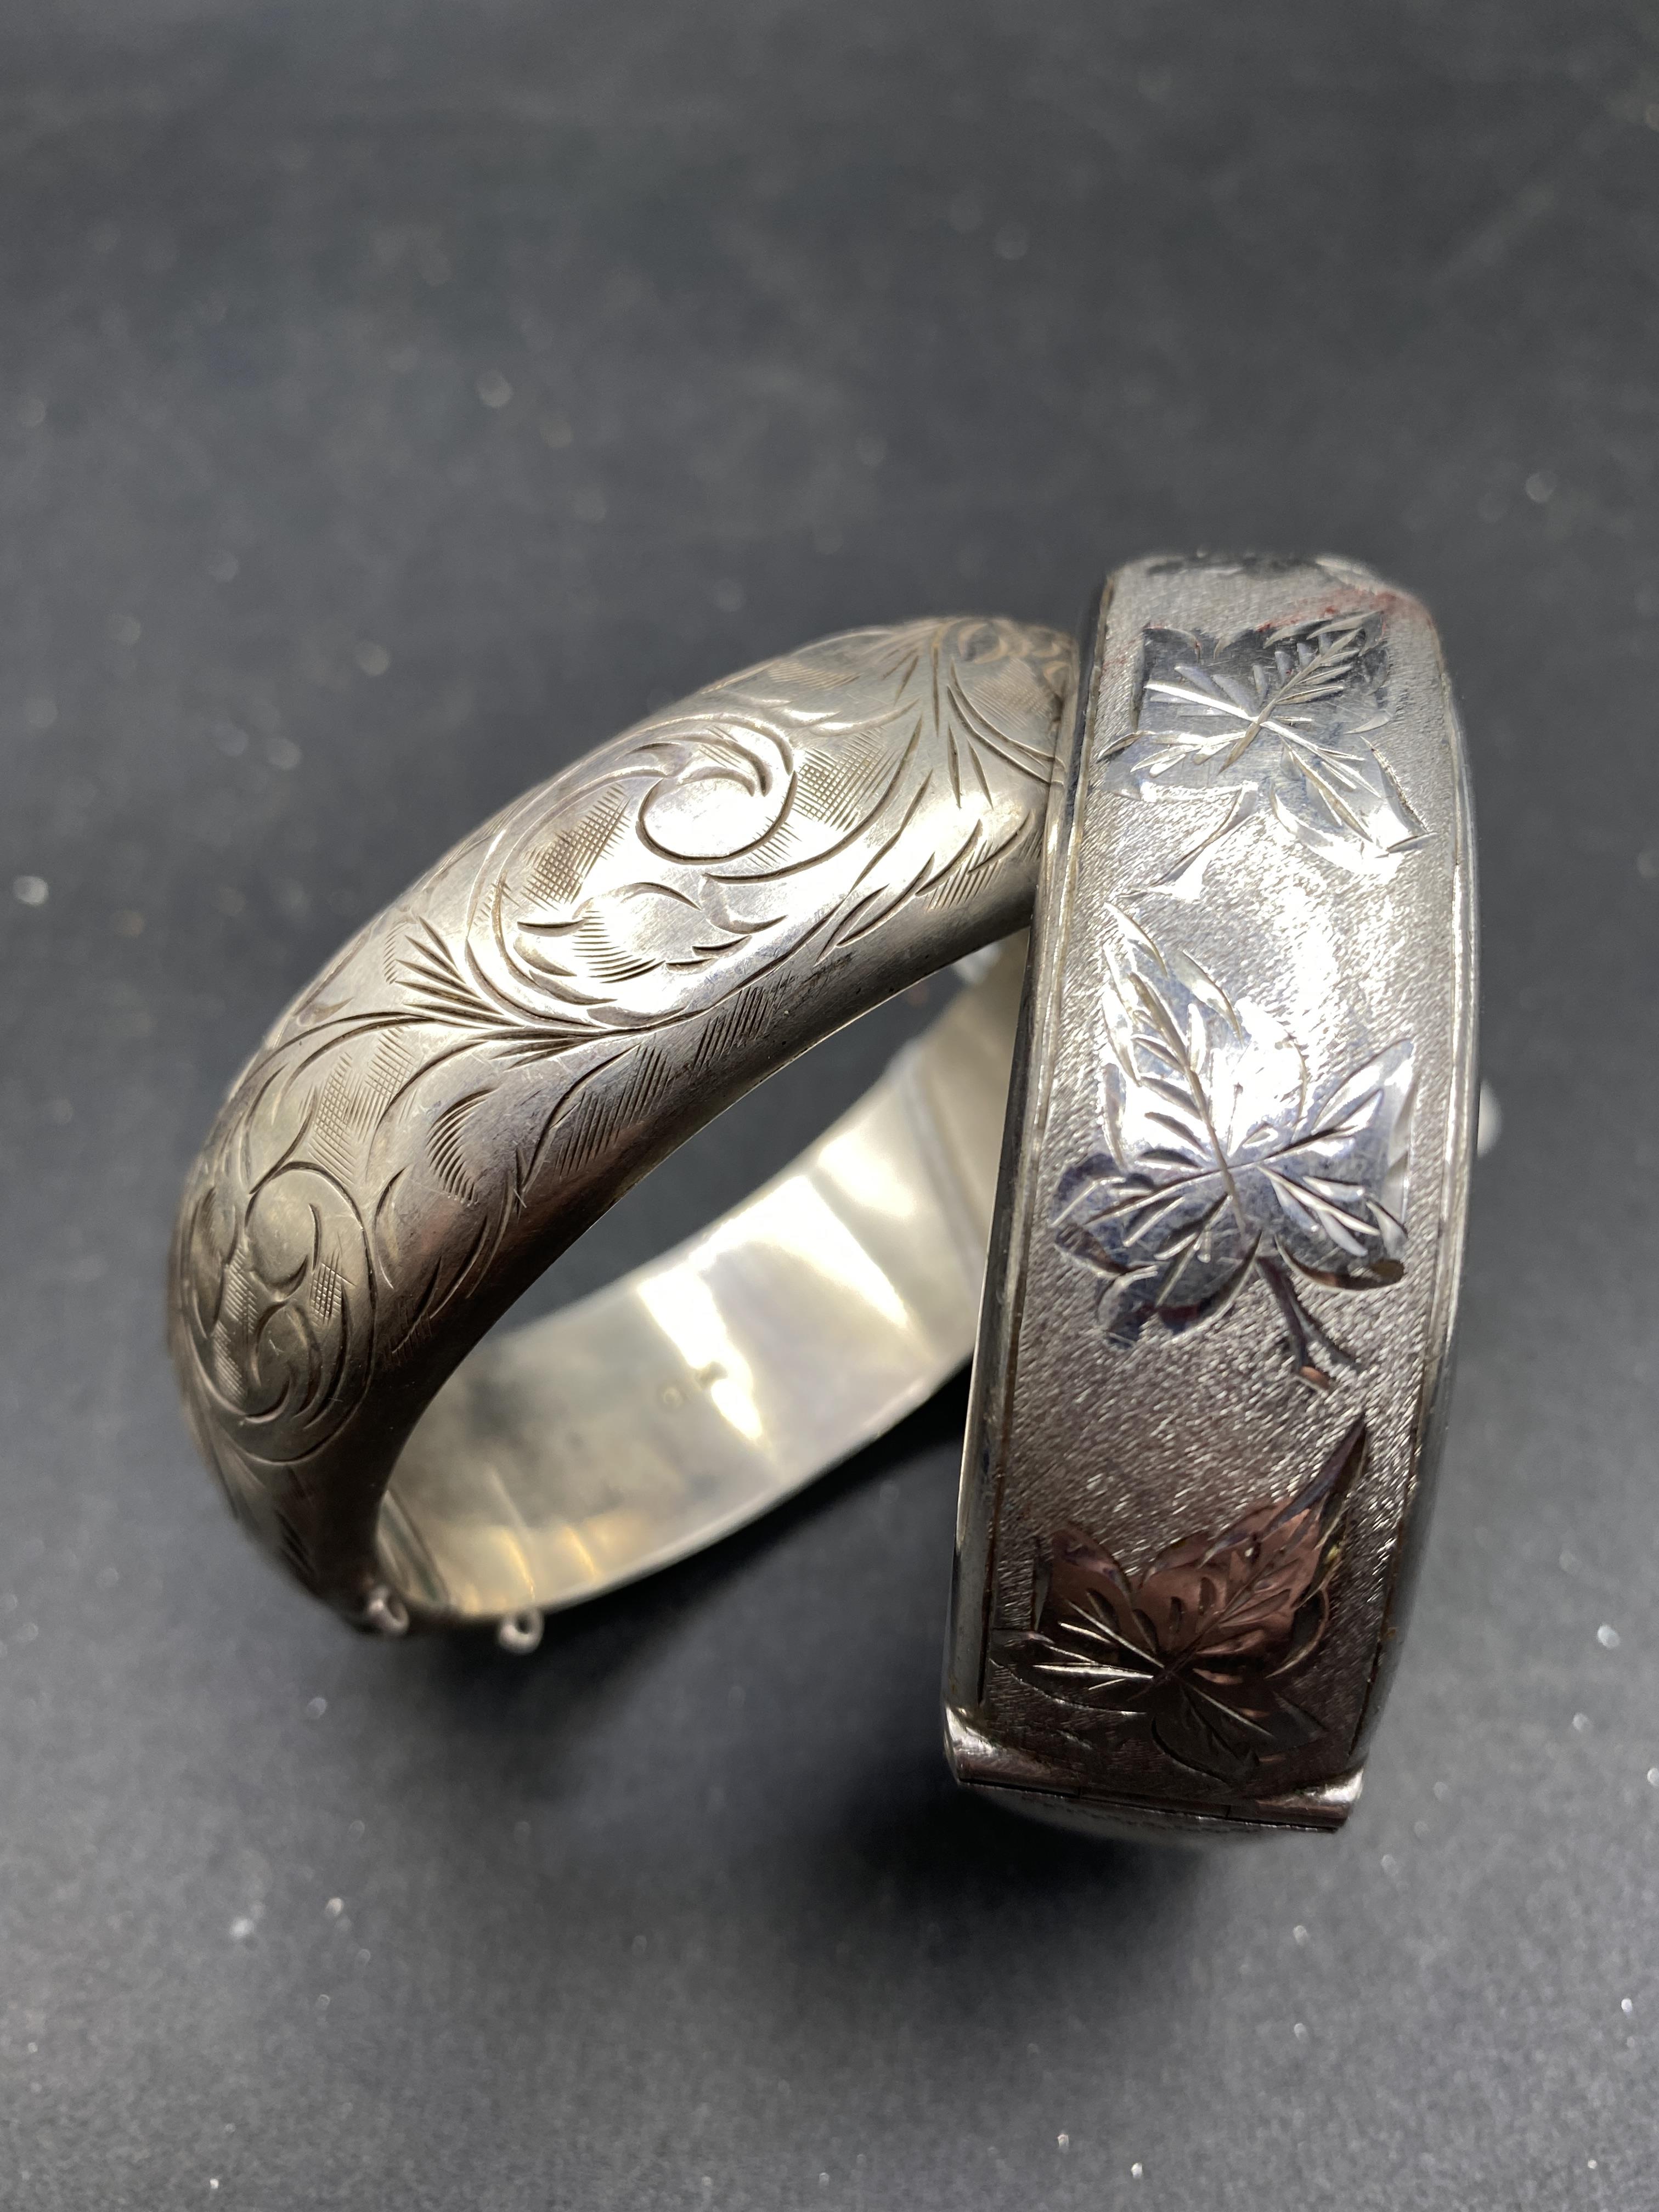 Two large heavy gauge silver bangles 72 gms - Image 2 of 2